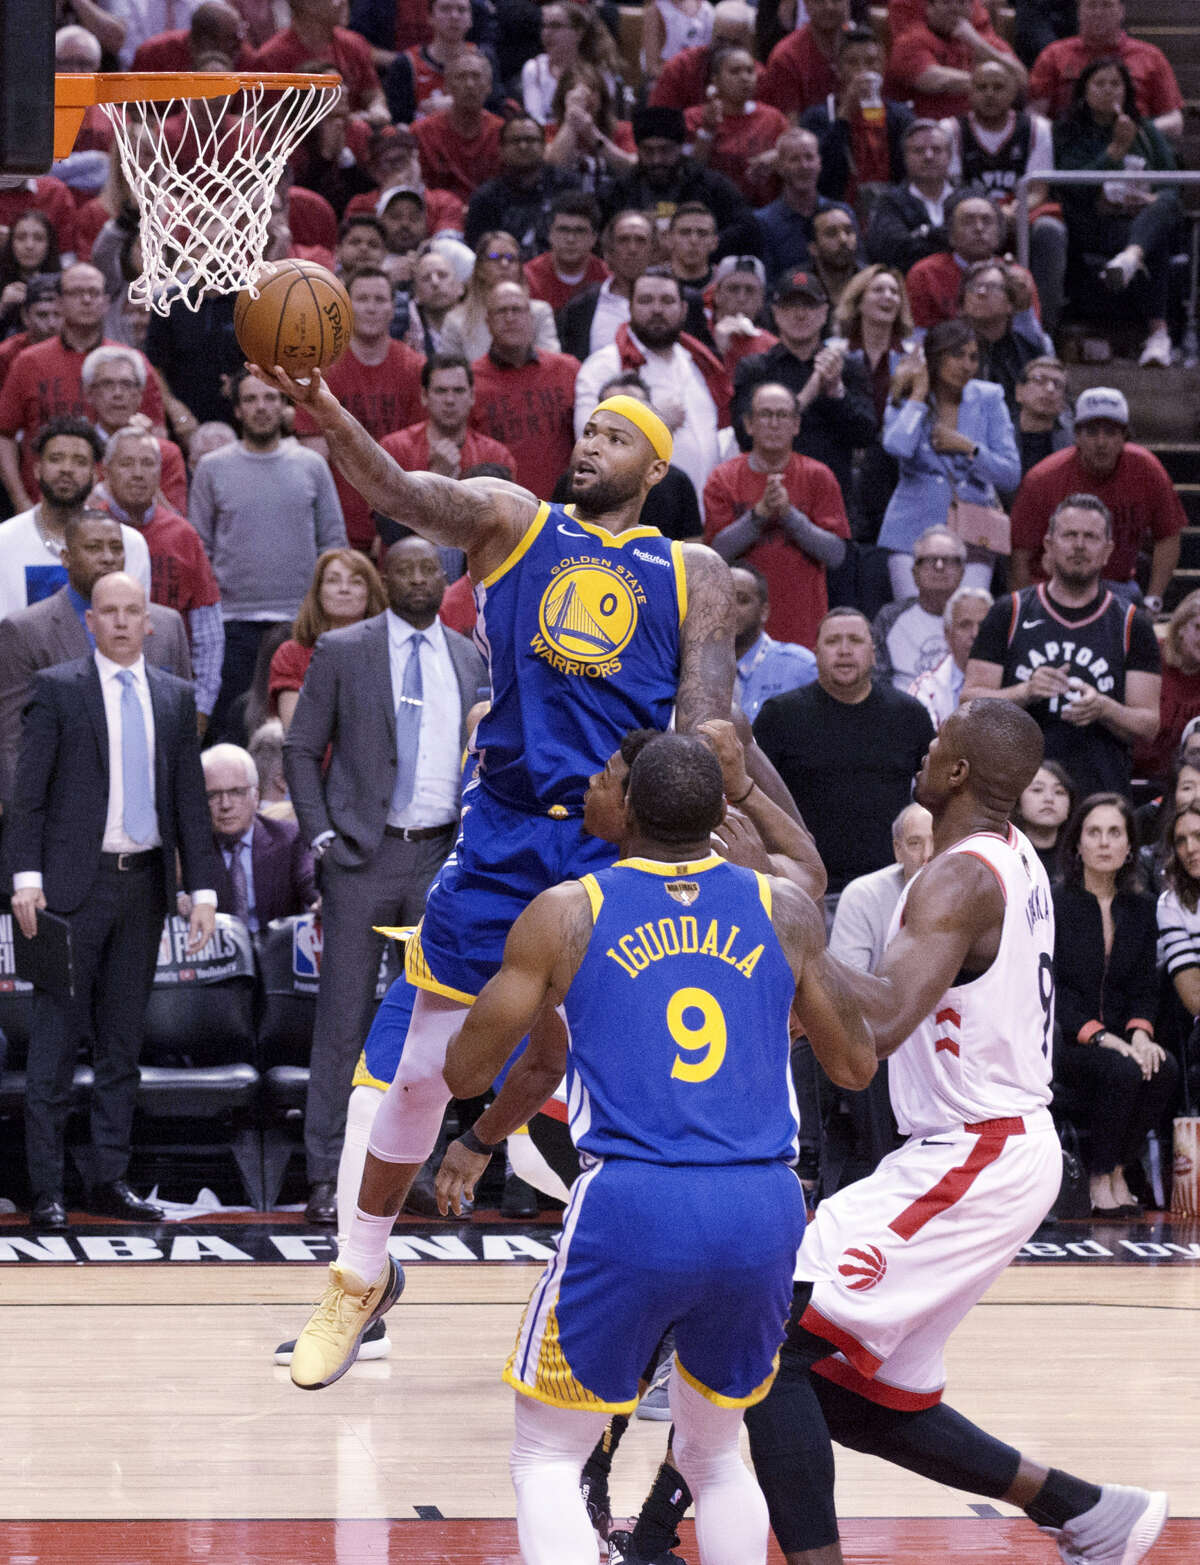 DeMarcus Cousins (0) shoots in the second half as the Golden State Warriors played Toronto Raptors in Game 2 of the 2019 NBA Finals at Scotiabank Arena in Toronto, Ontario, Canada, on Sunday, June 2, 2019. The Raptors lead the series 1-0.